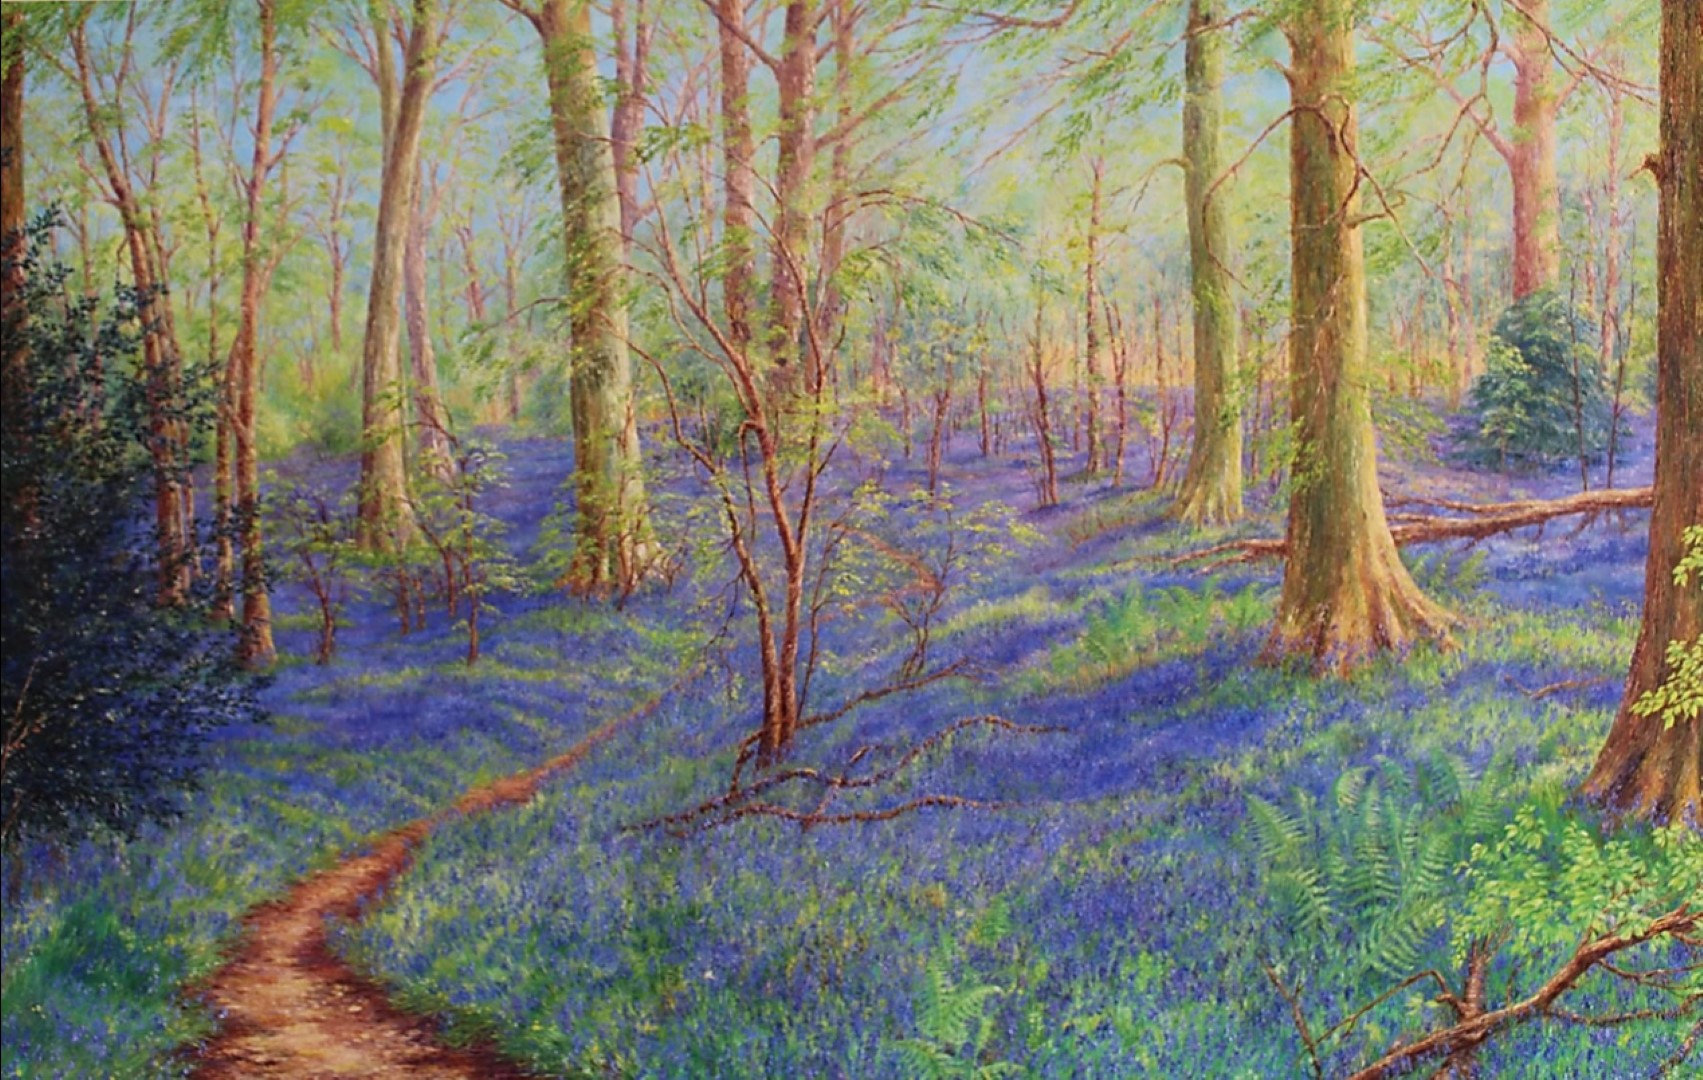 Bluebell Wood – Amersham (England) – Oil on canvas – 6ft 7 inches x 3ft 7 inches